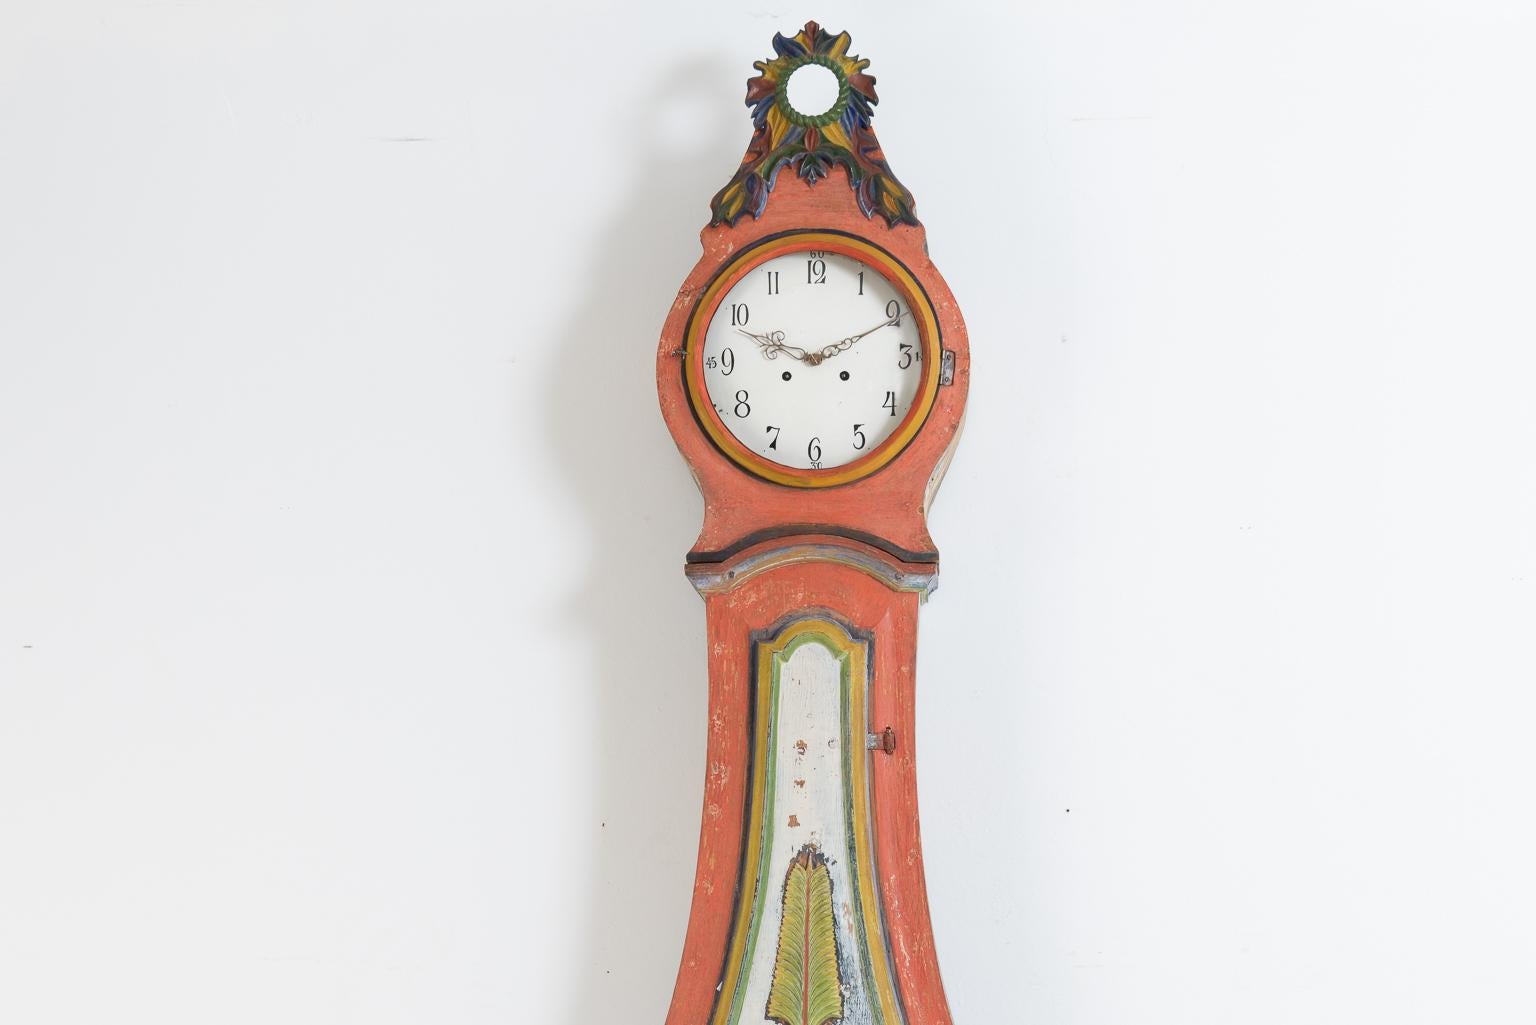 Gustavian model long case clock from northern Sweden. All the embellishments are carved wooden decorations. The clock mechanism is serviced and functional at the time of writing but we cannot provide any guarantees for future function. The clock has